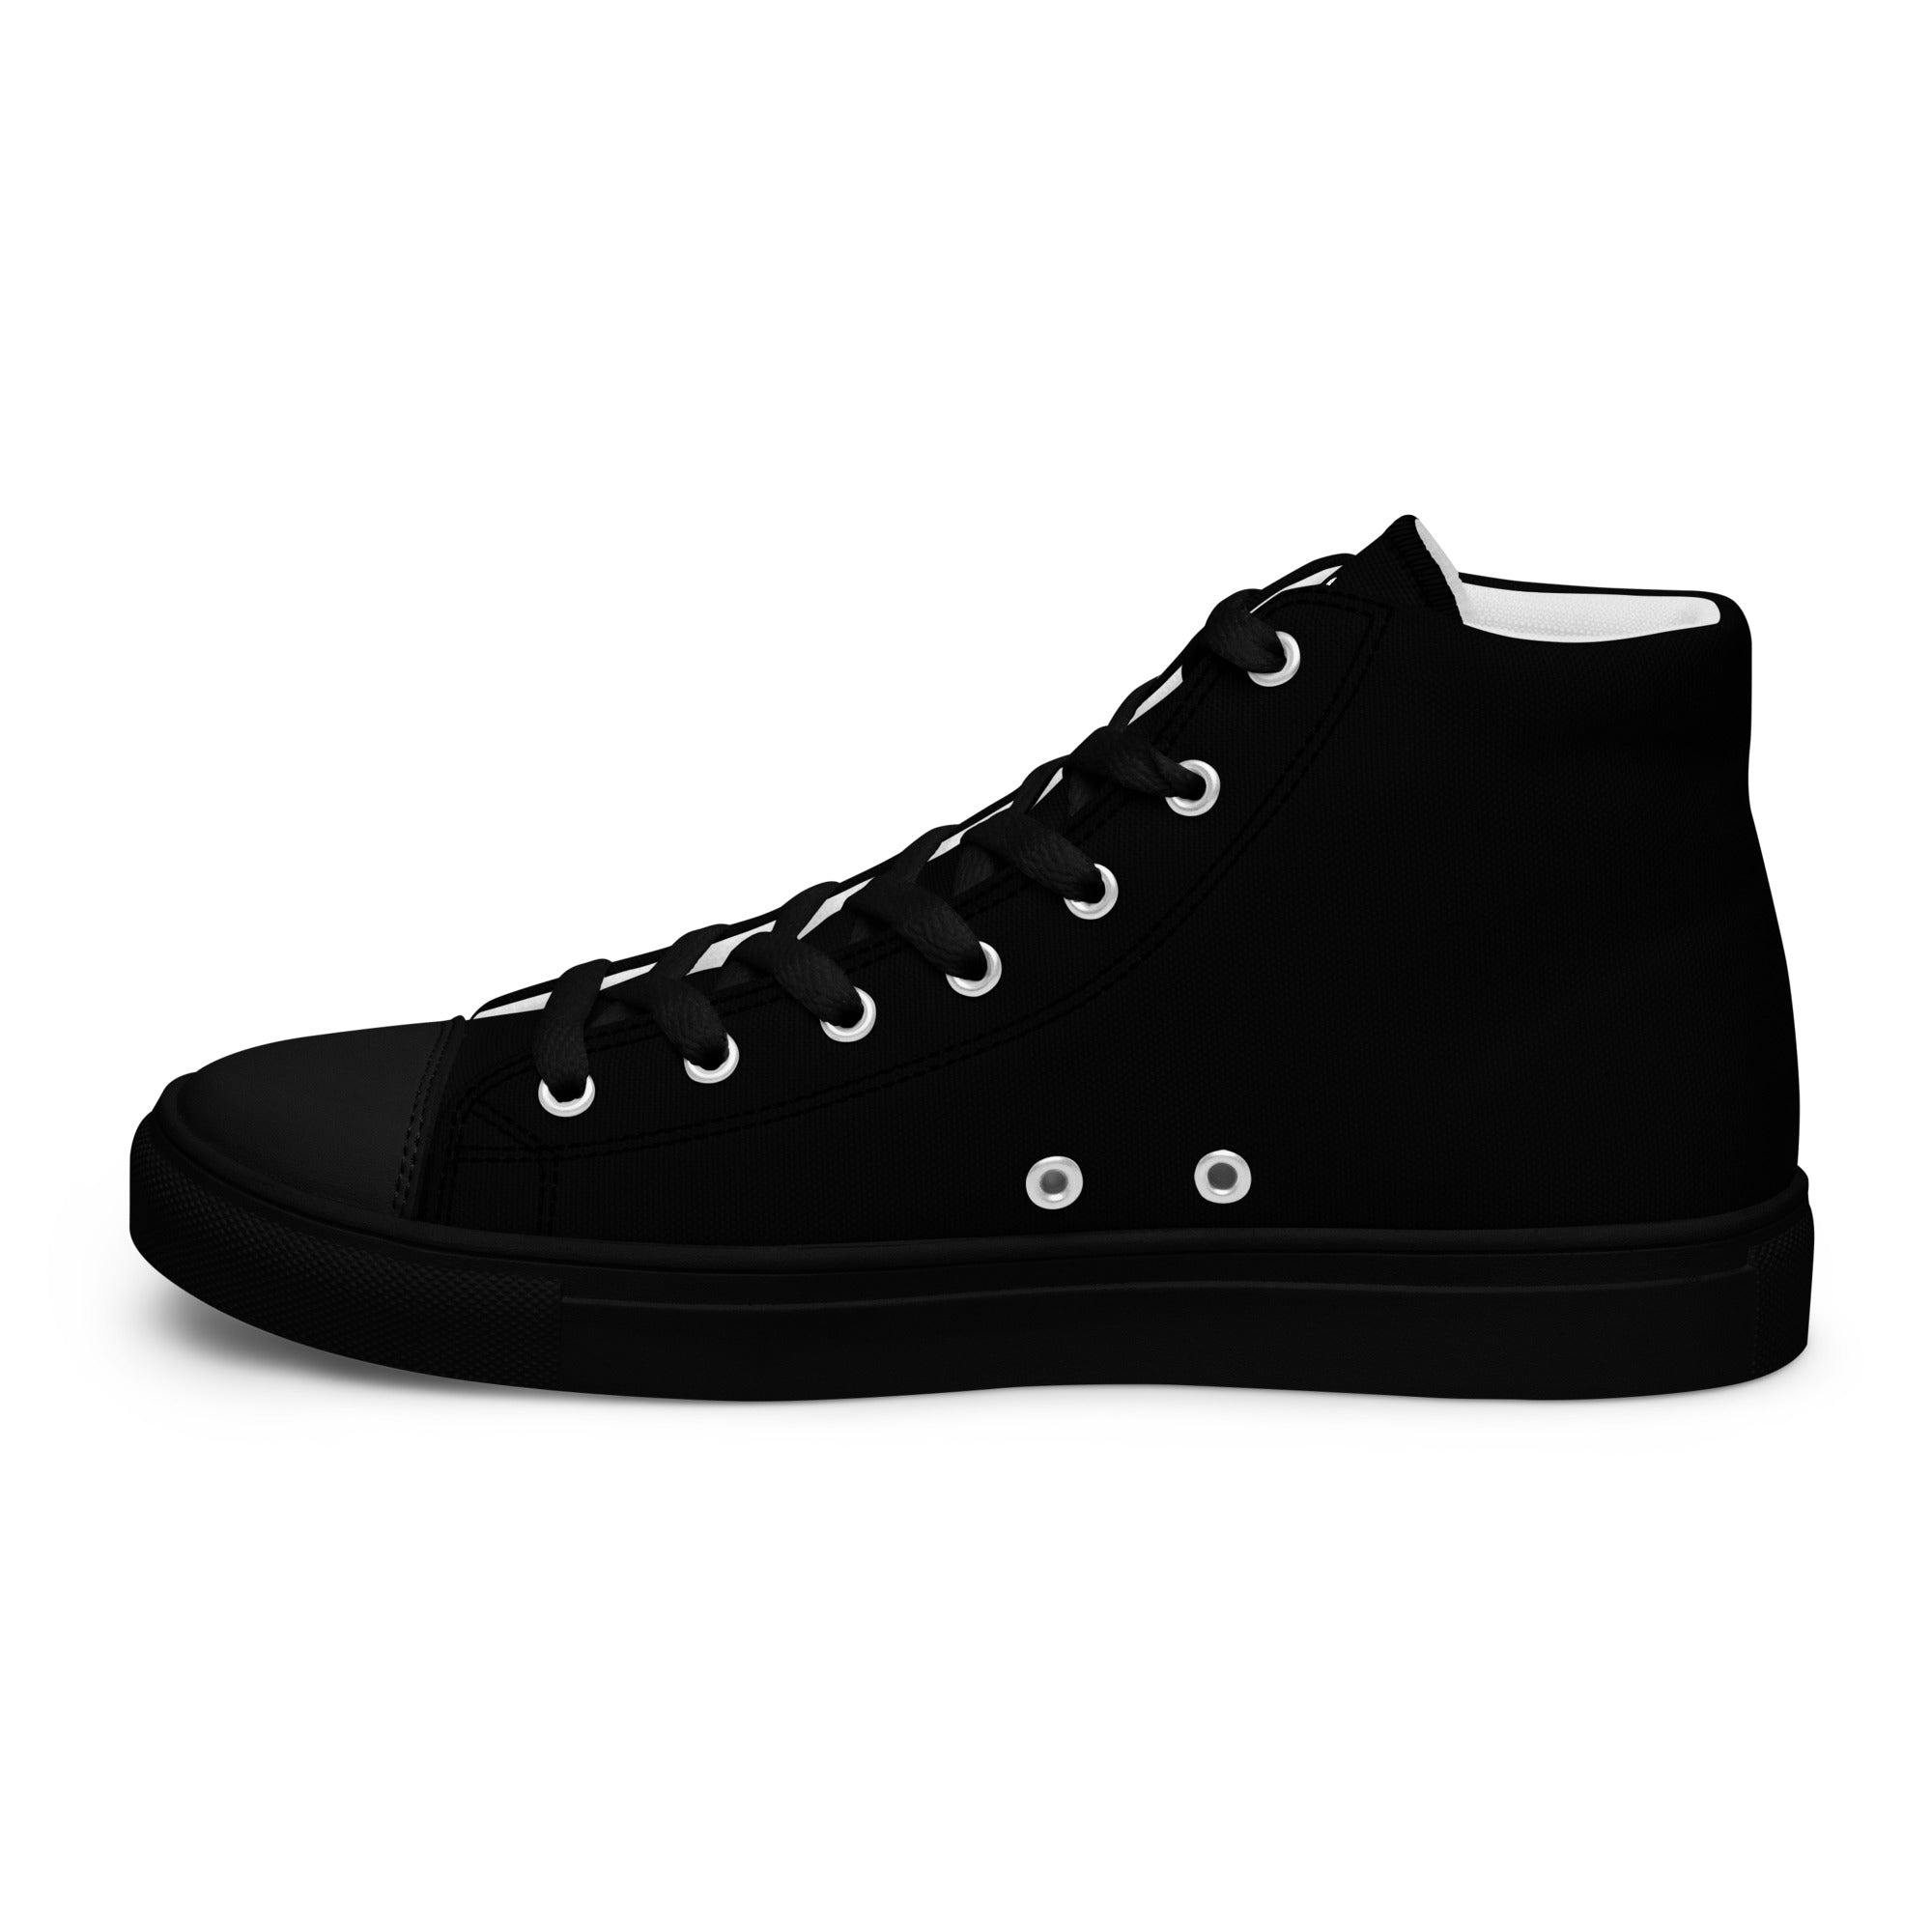 FASHION THERAPY hoge canvas damessneakers